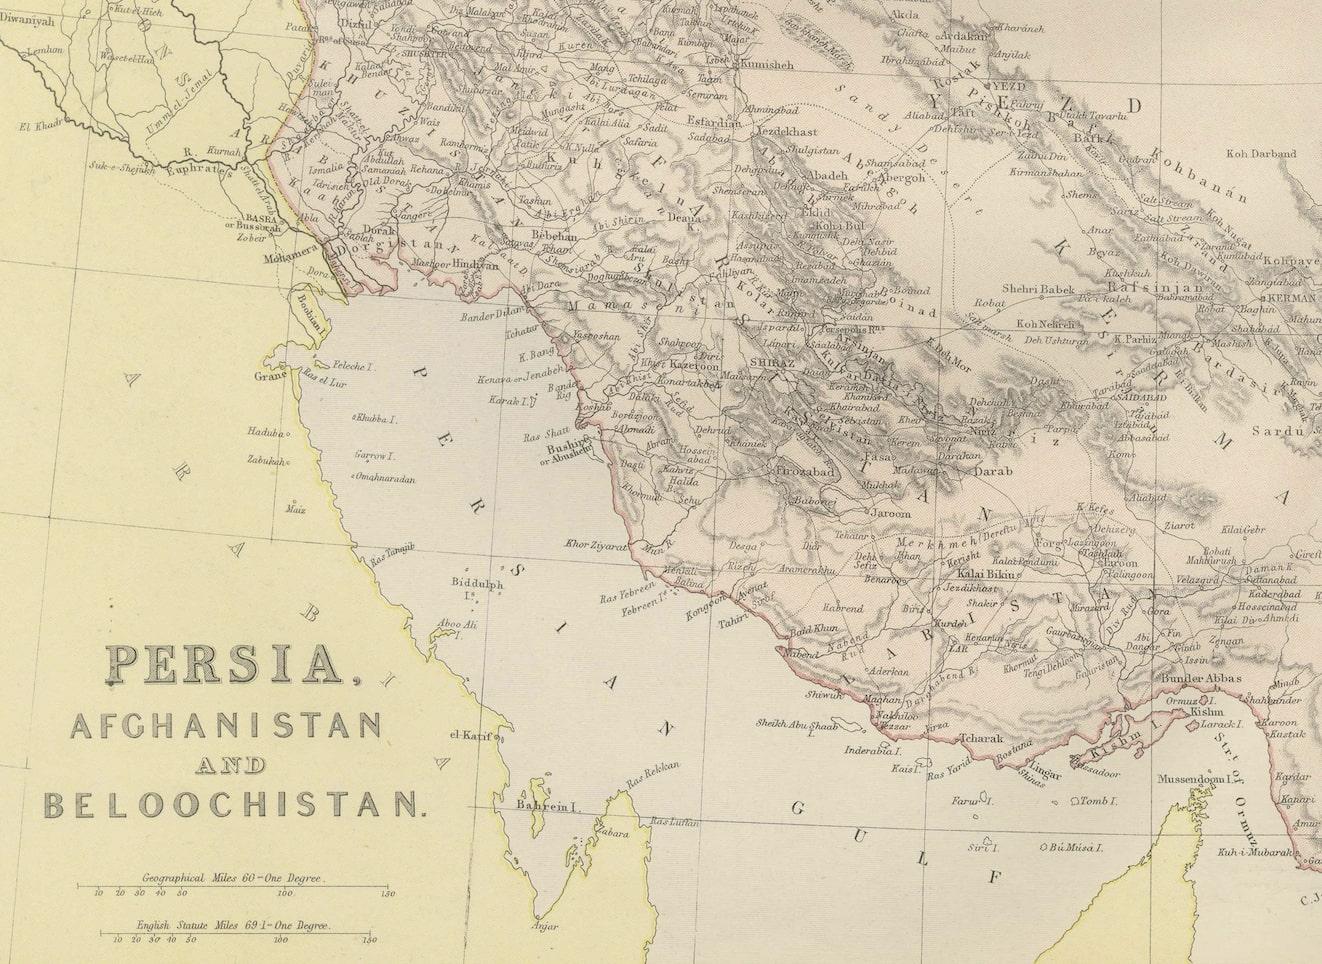 This historical map from the 1882 atlas published by Blackie & Son is a comprehensive depiction of Persia (modern-day Iran), Afghanistan, and Baluchistan (the region that includes parts of modern-day Pakistan, Iran, and Afghanistan). It offers an